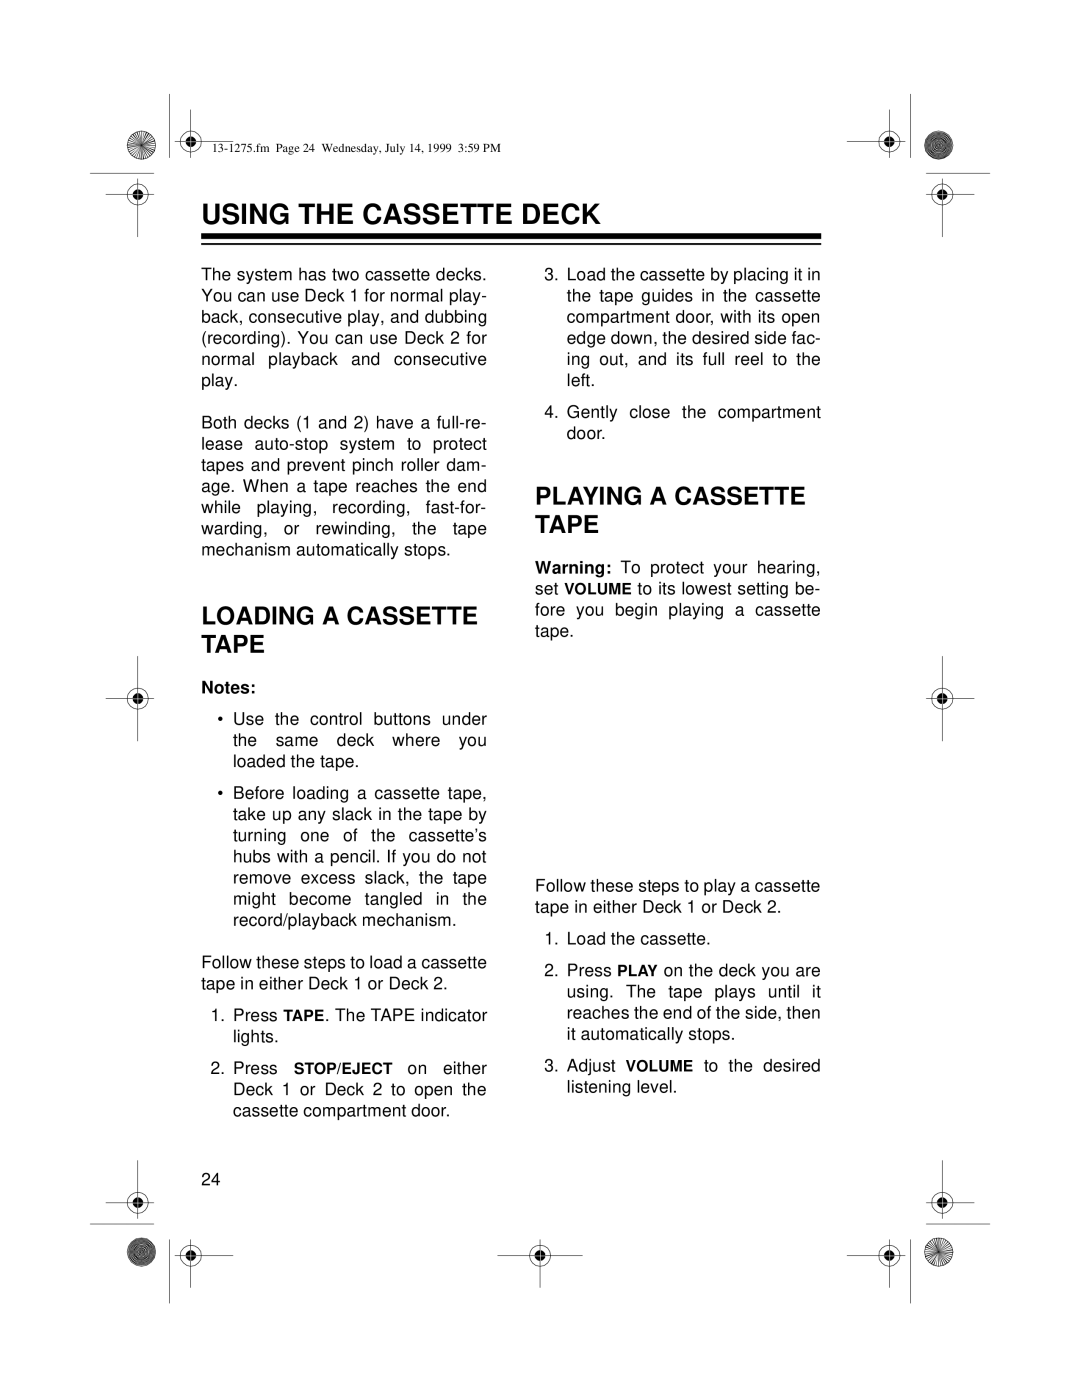 Optimus SYSTEM 728 owner manual Using The Cassette Deck, Loading A Cassette Tape, Playing A Cassette Tape 